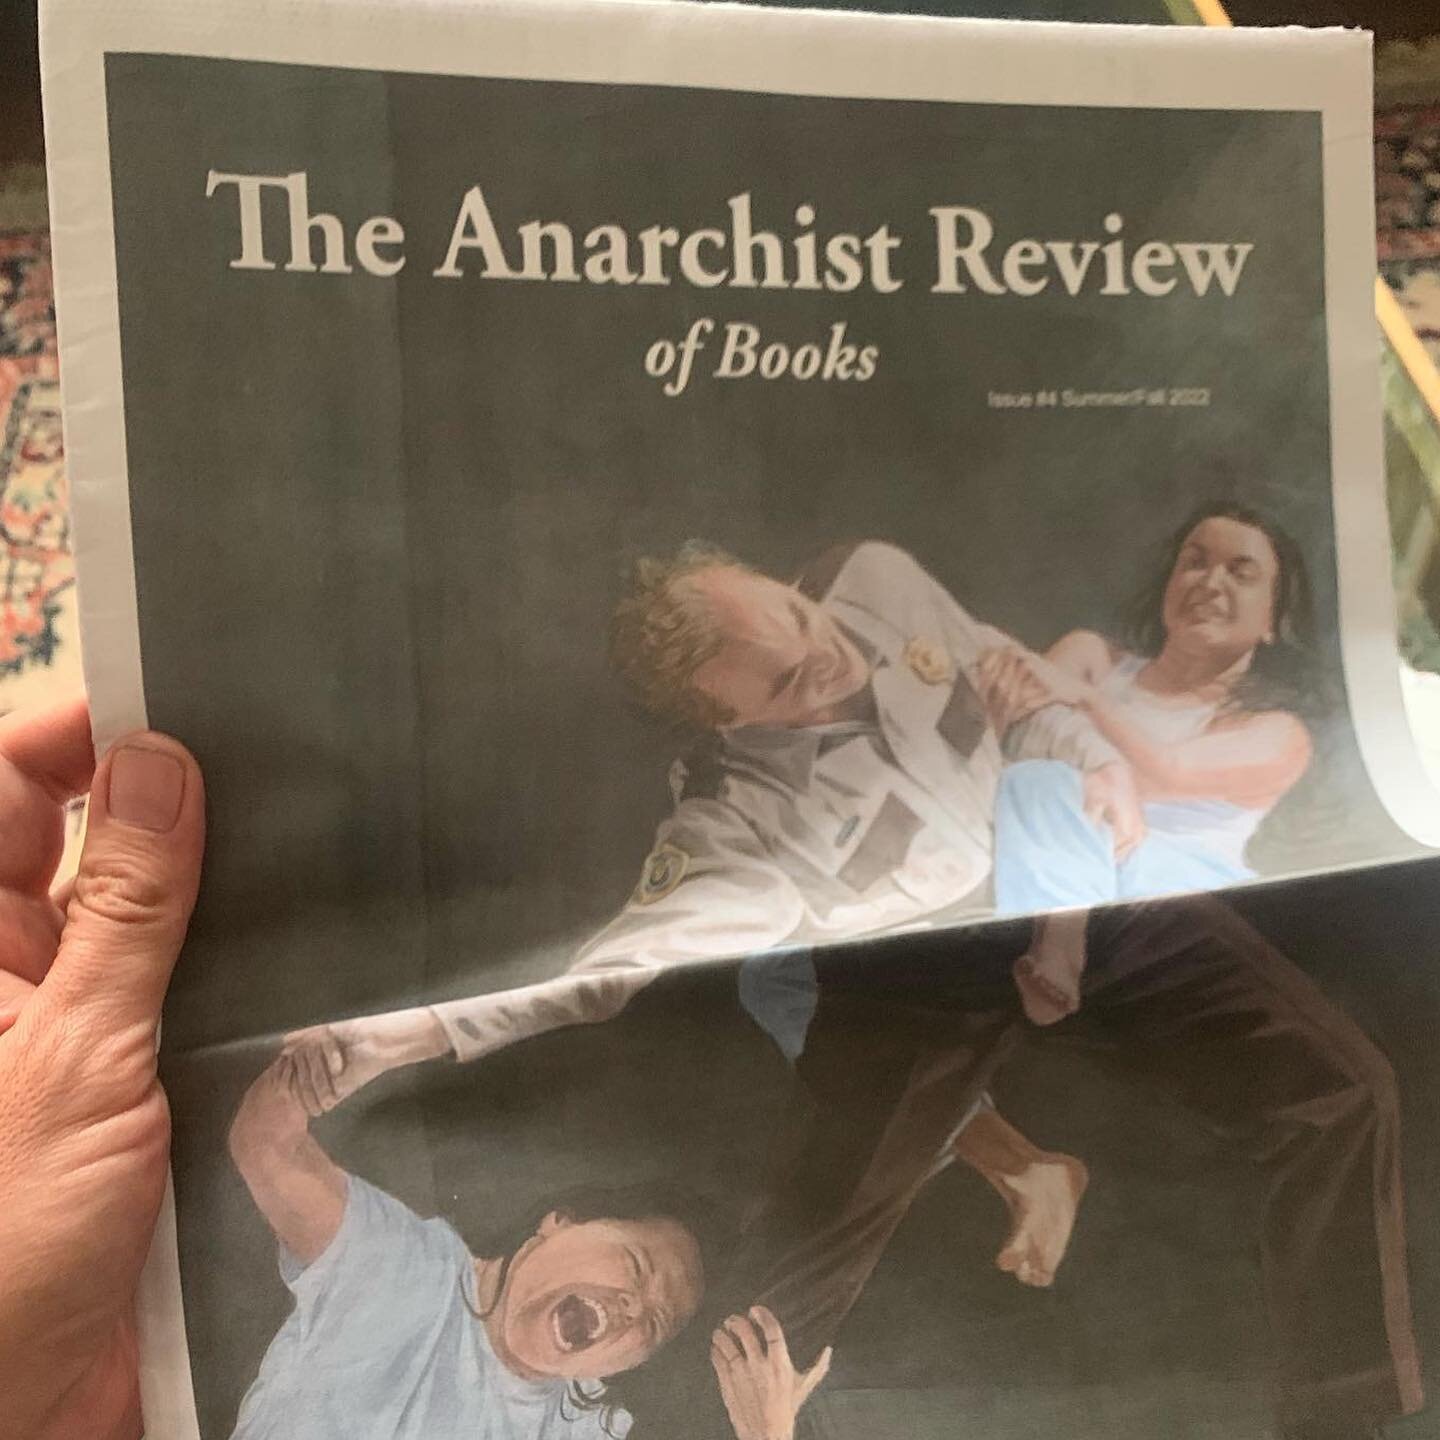 Excellent surprise in the post today, my contributor copy of @anarchistreviewofbooks featuring my work alongside the good folks @dogsectionpress 🖤🖤🖤